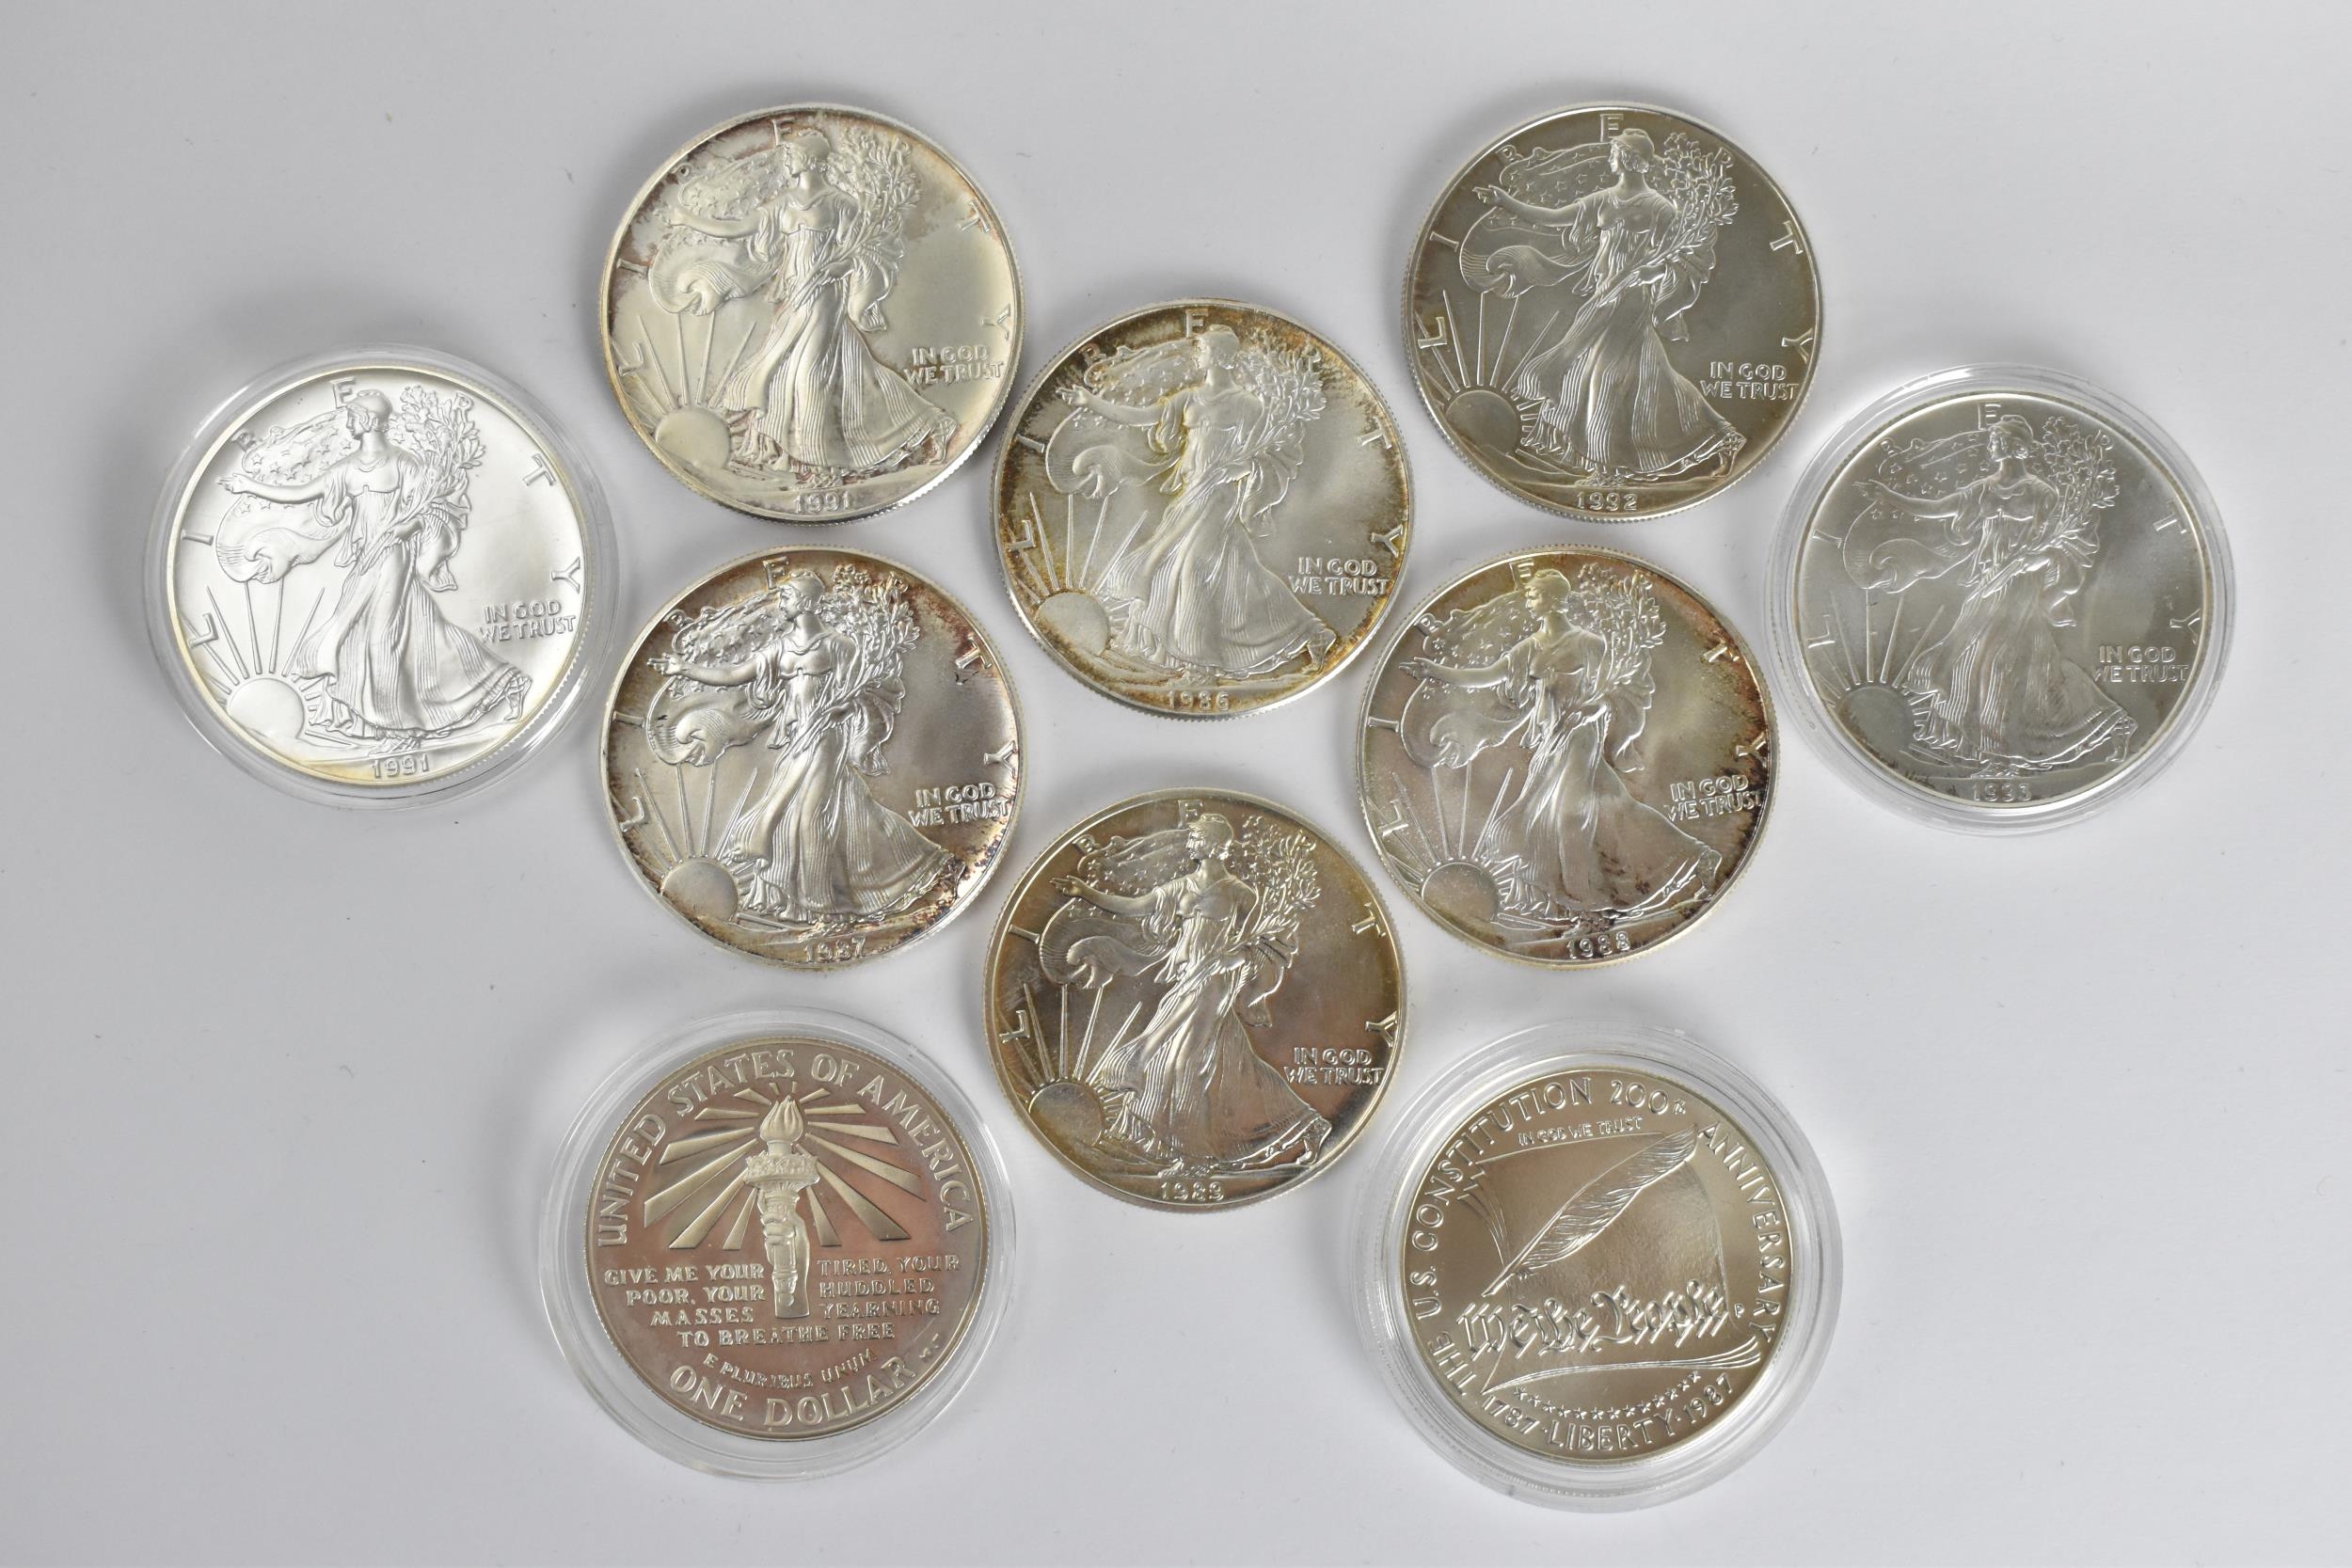 Official Silver Coins of The United States of America' part of the Royal Mint collection, eight ' - Image 5 of 10